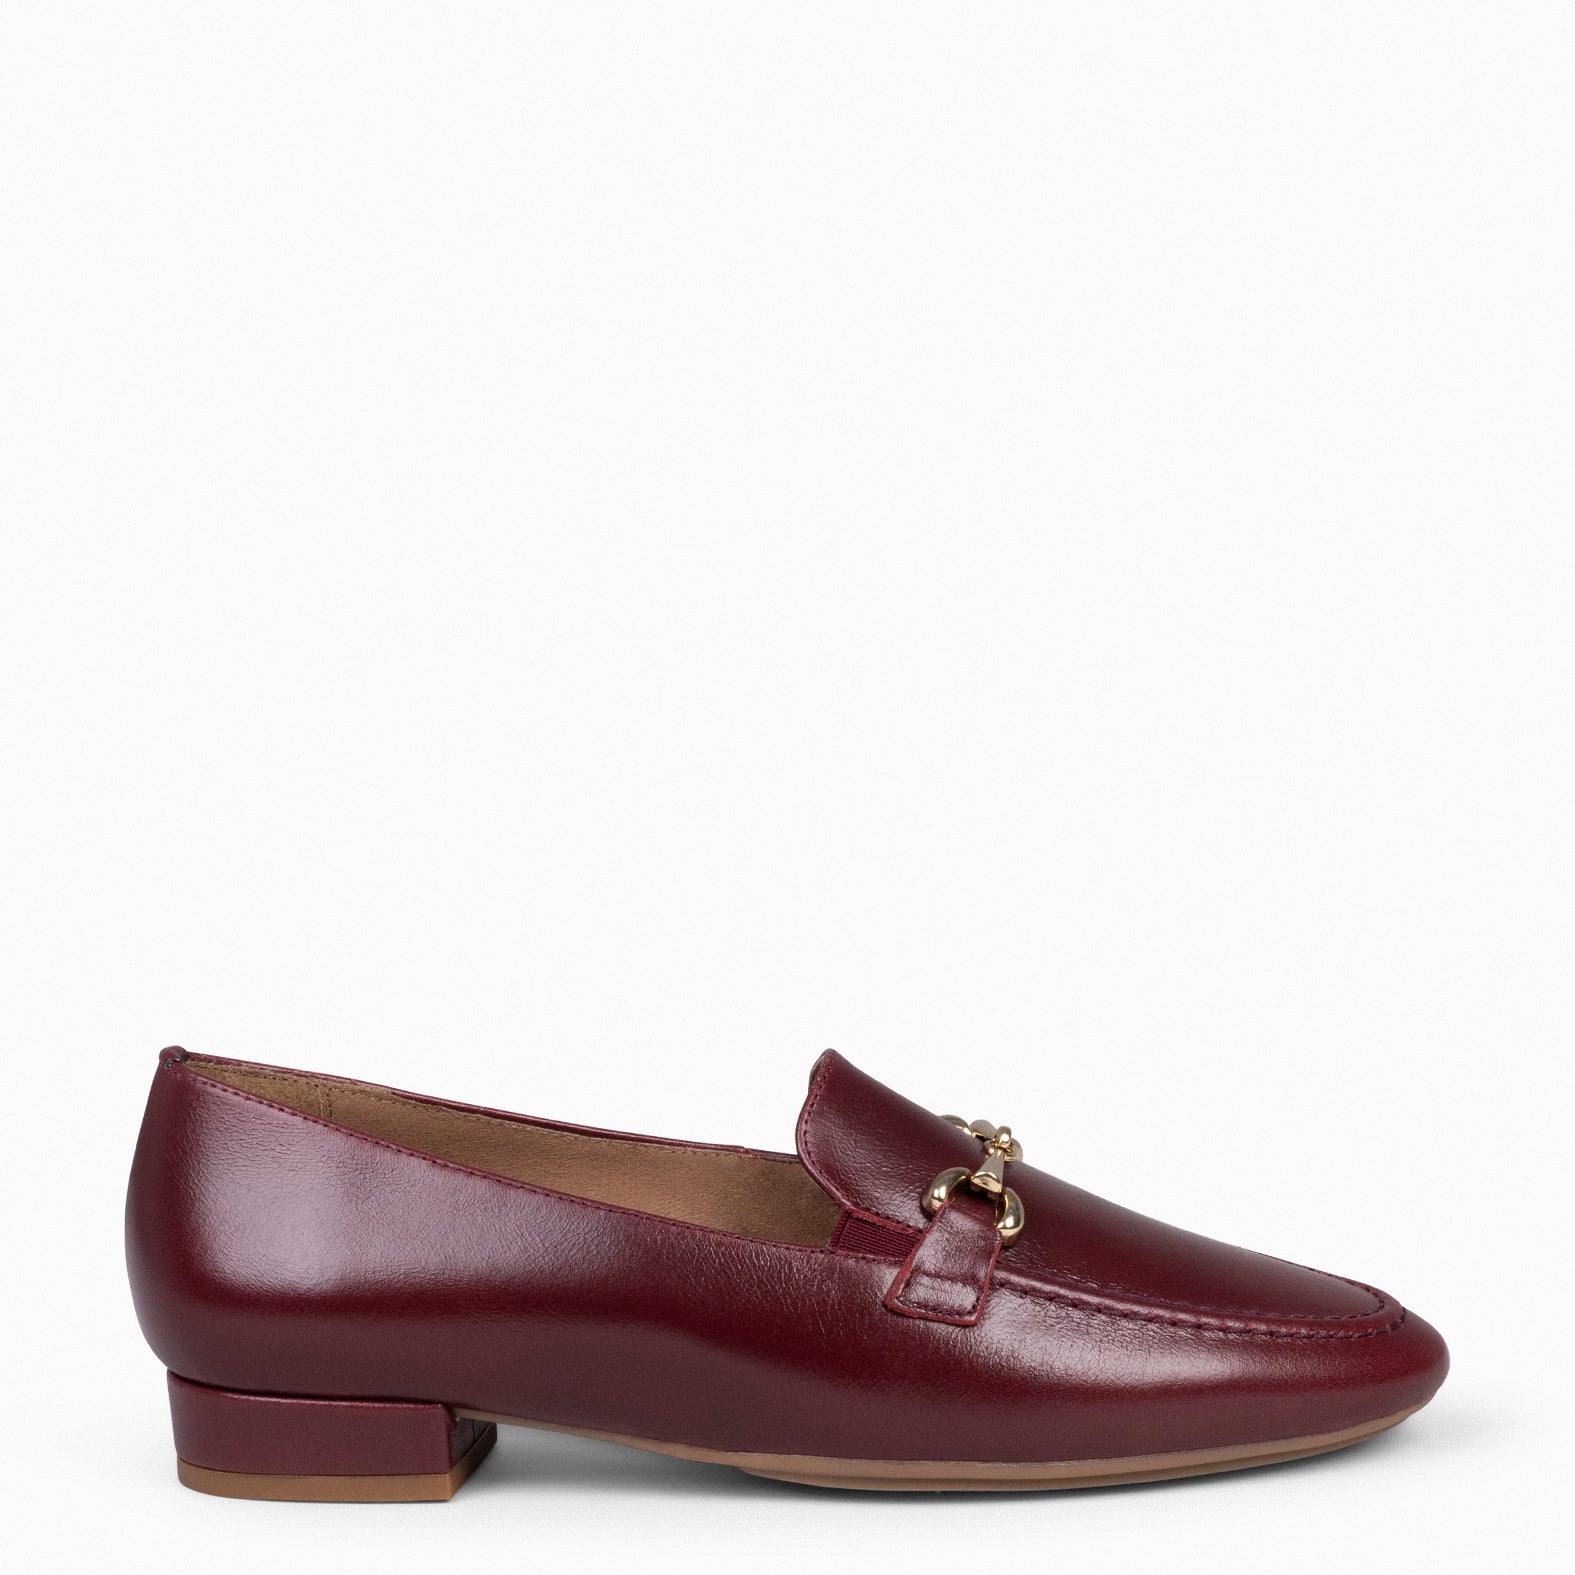 STYLE - BURGUNDY moccasins with metallic detail